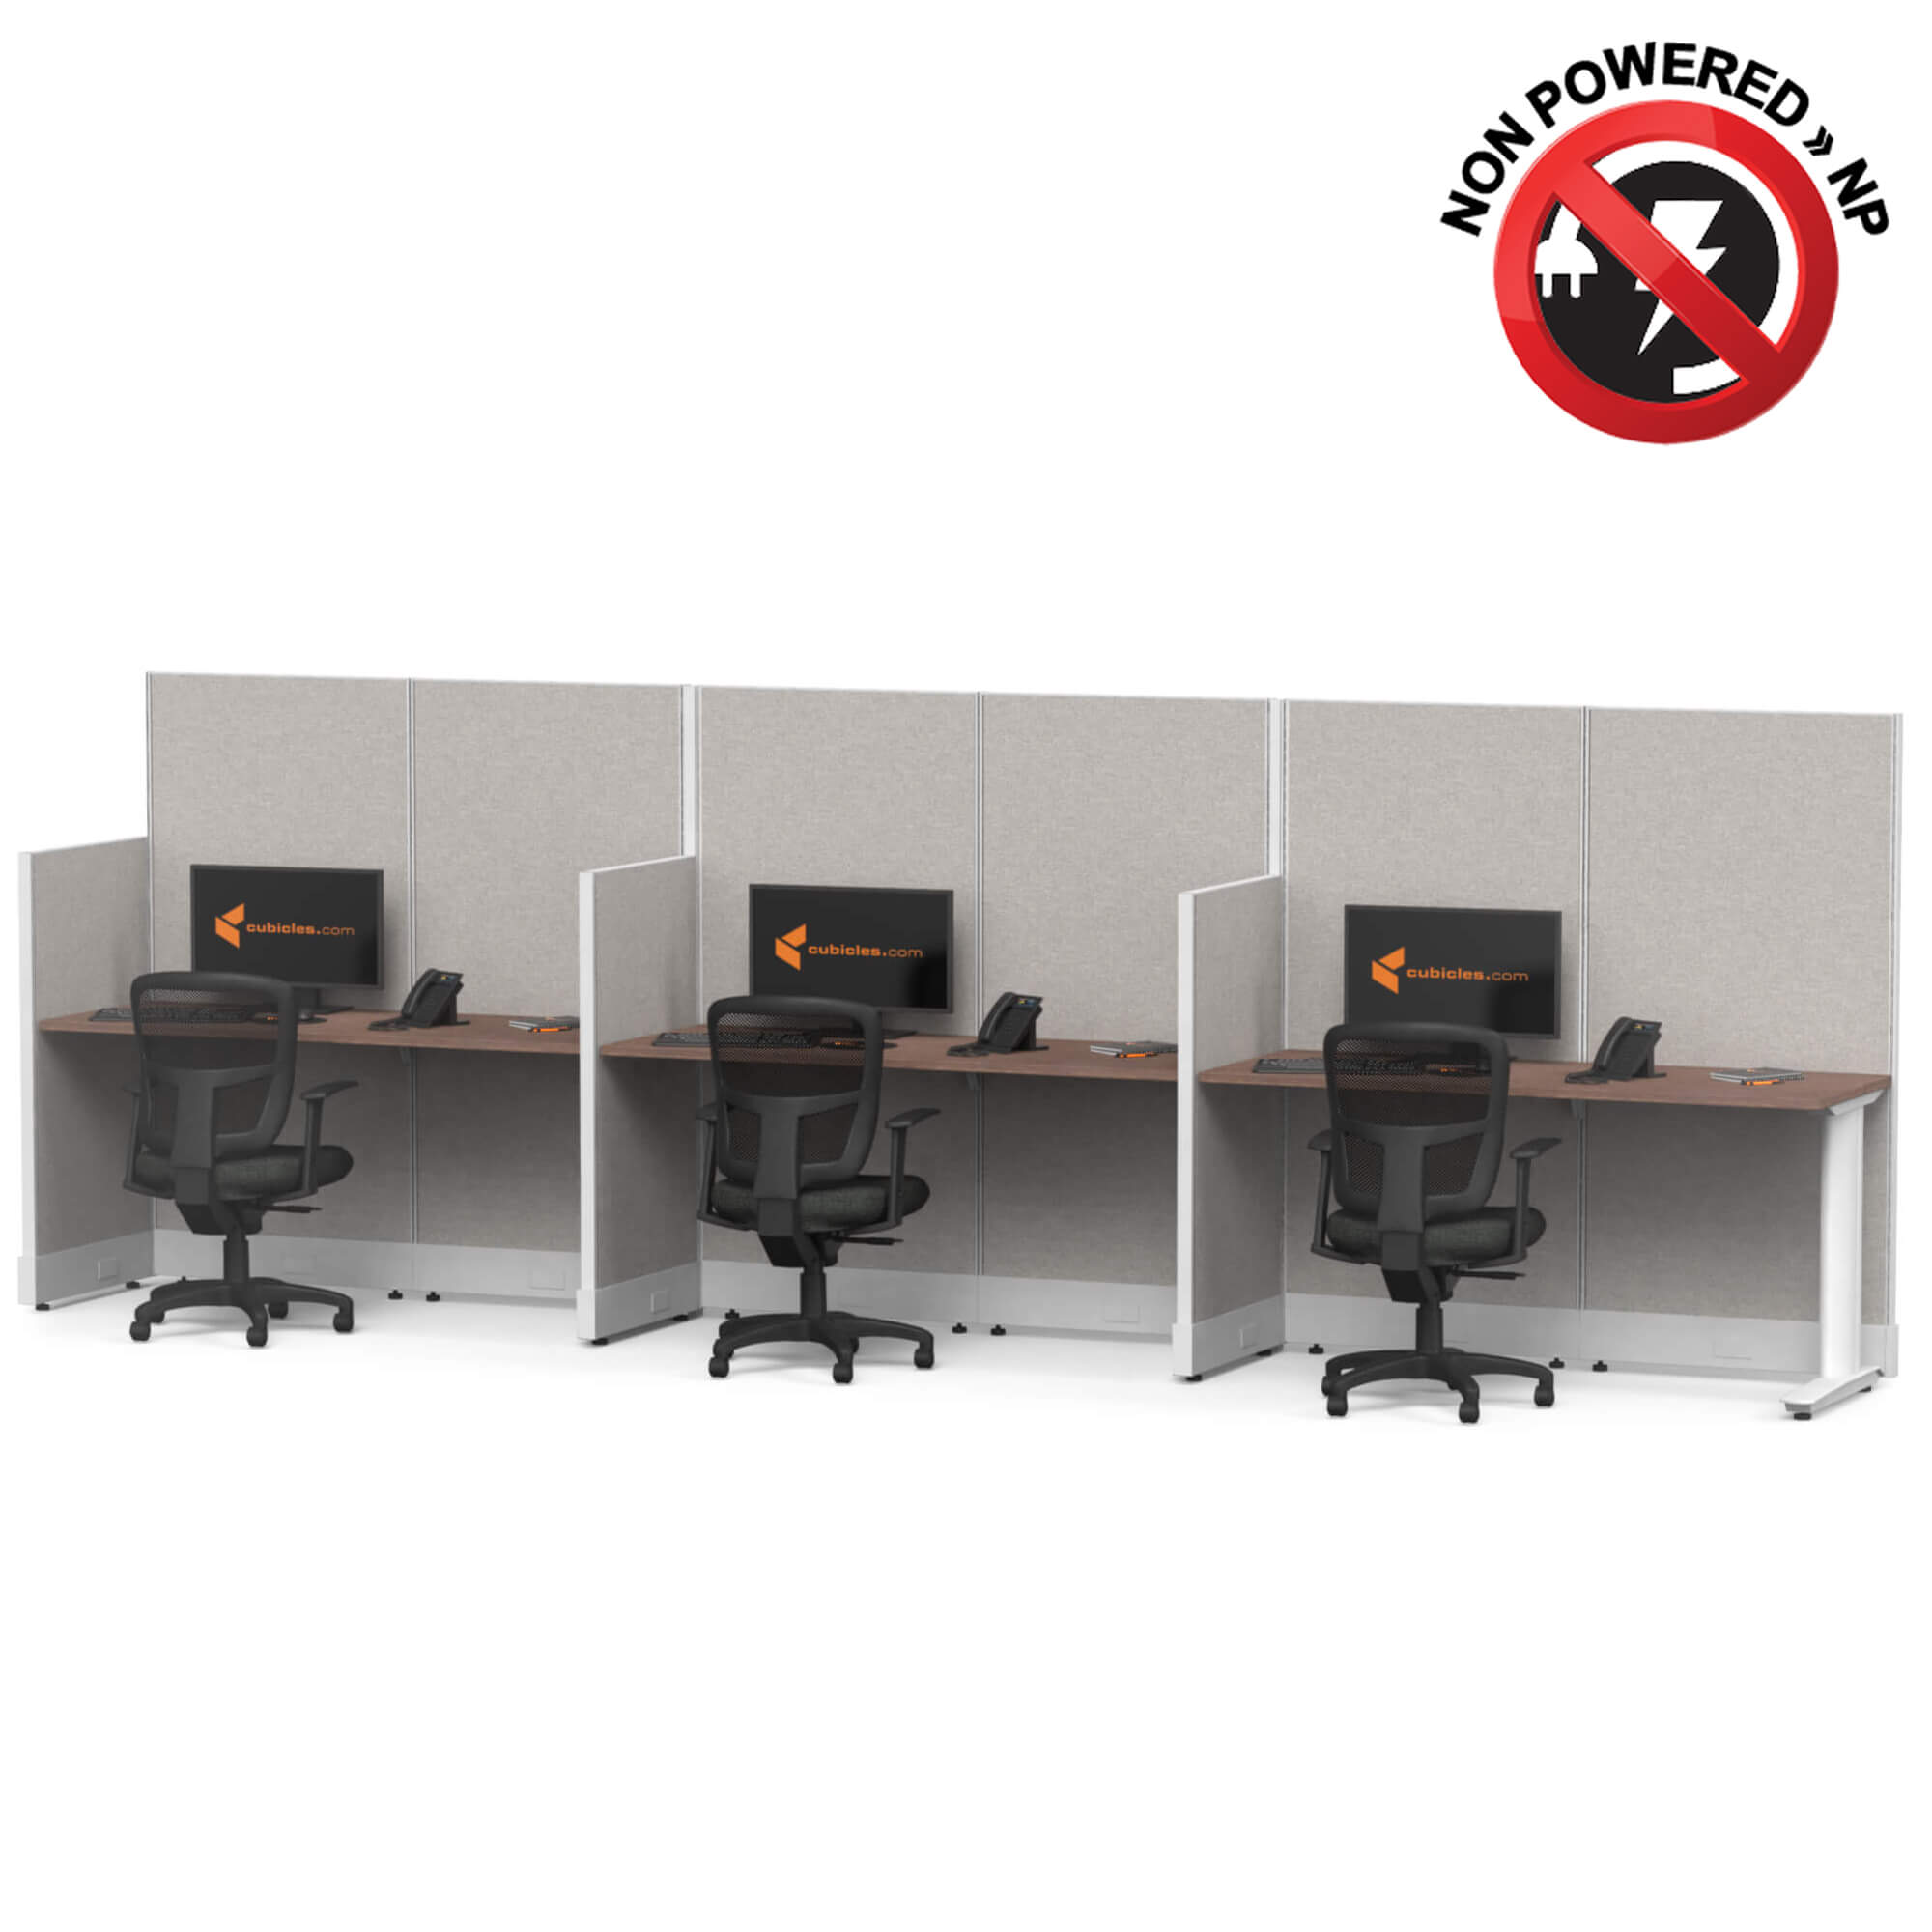 Cubicle desk straight 3pack non powered sign